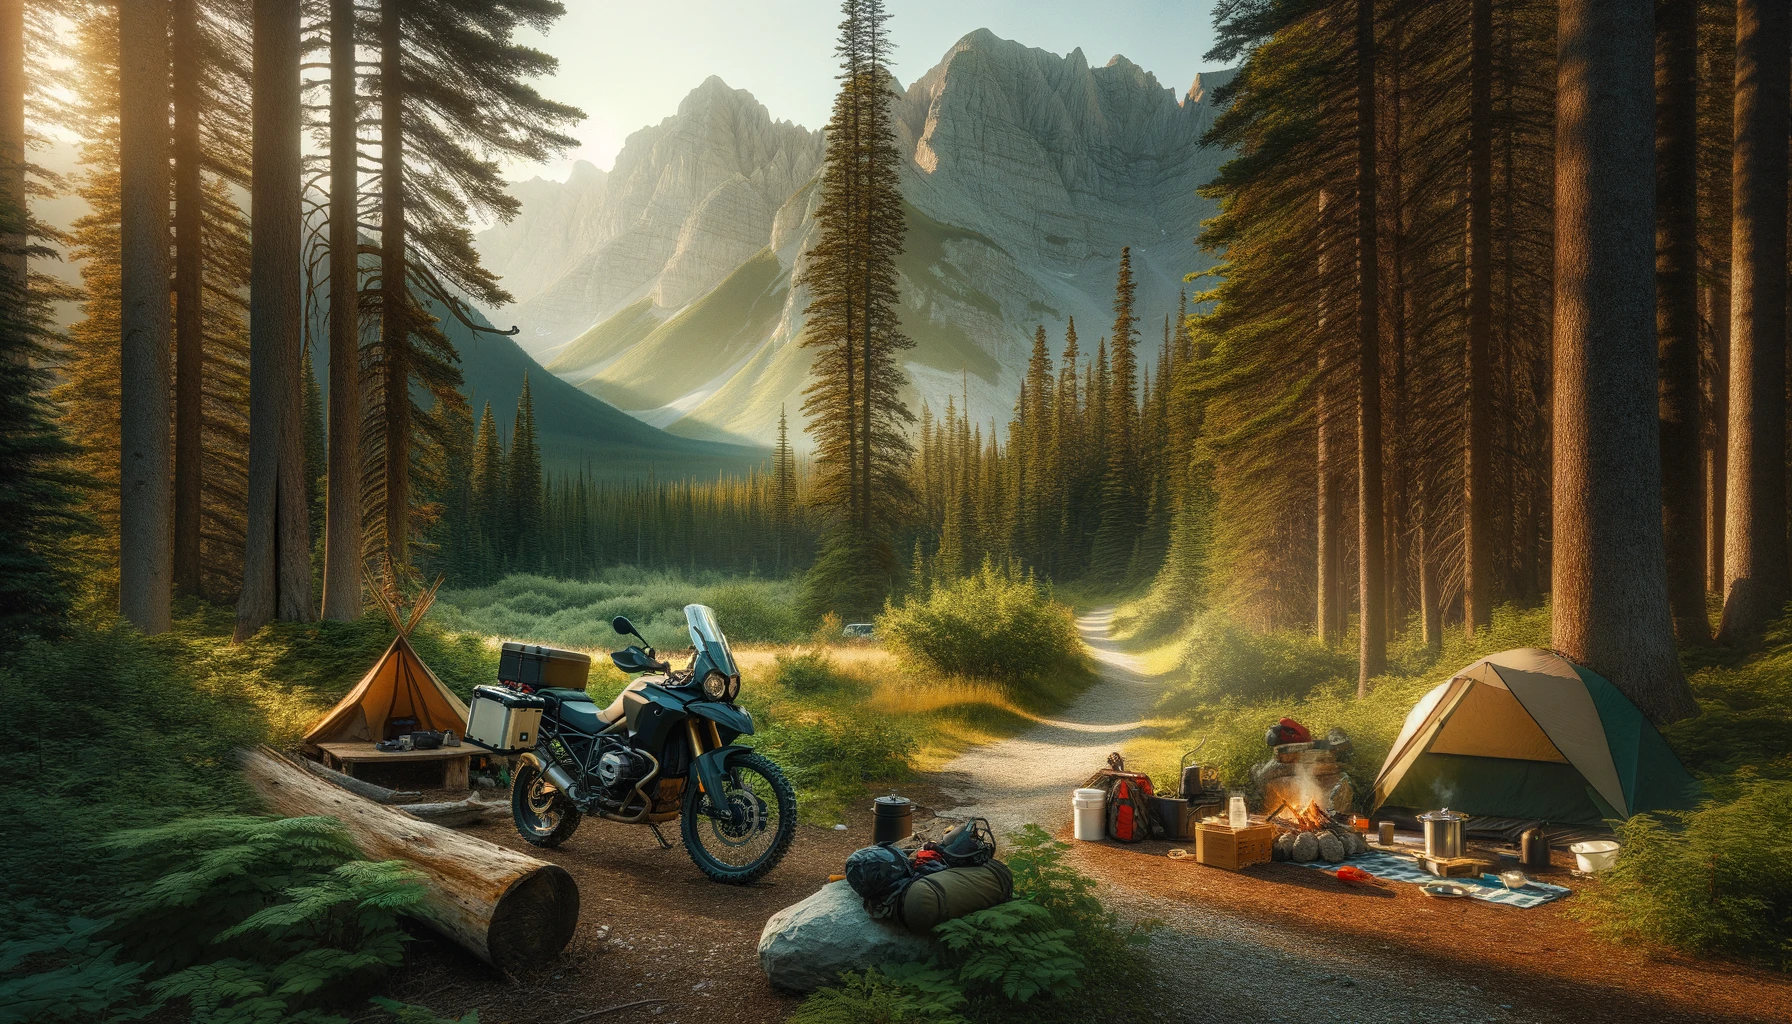 otorcycle-camping-scene-with-a-nearby-hiking-trail